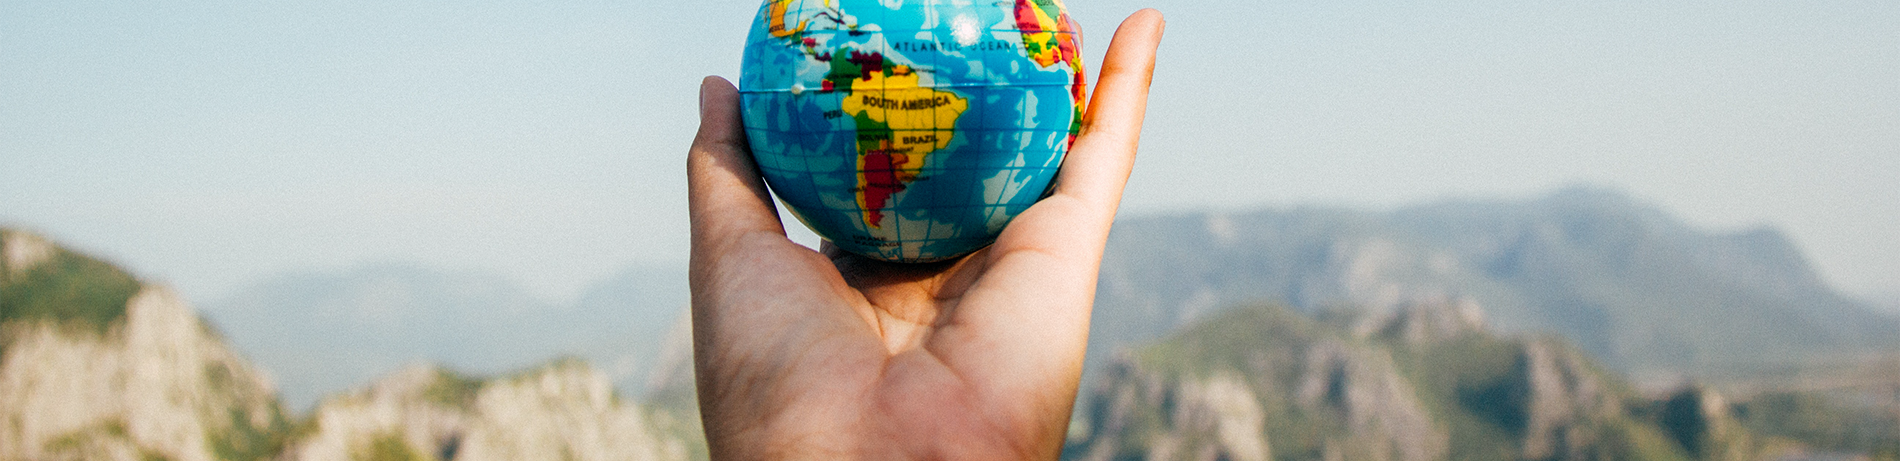 person outdoors holding small map globe in their hand